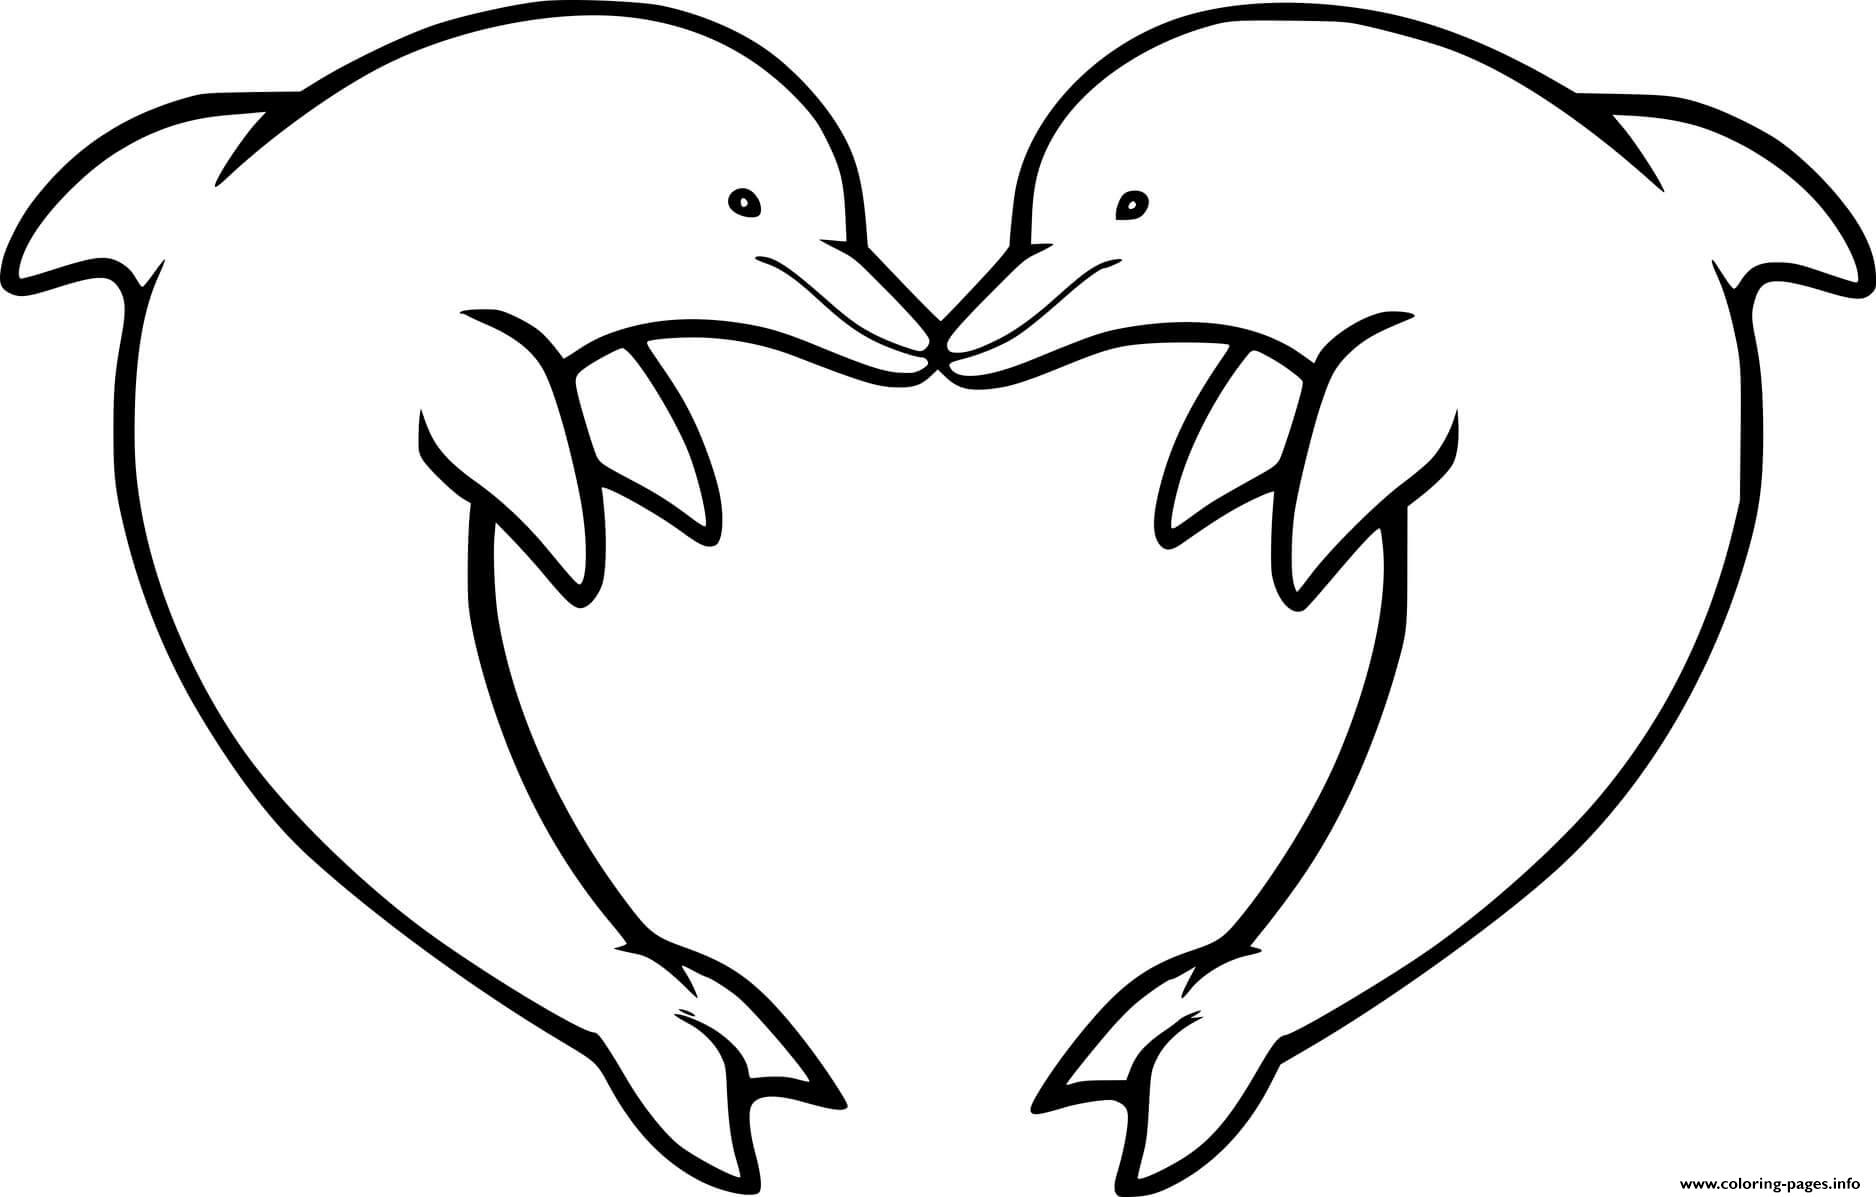 Two Dolphins Shaped A Heart coloring